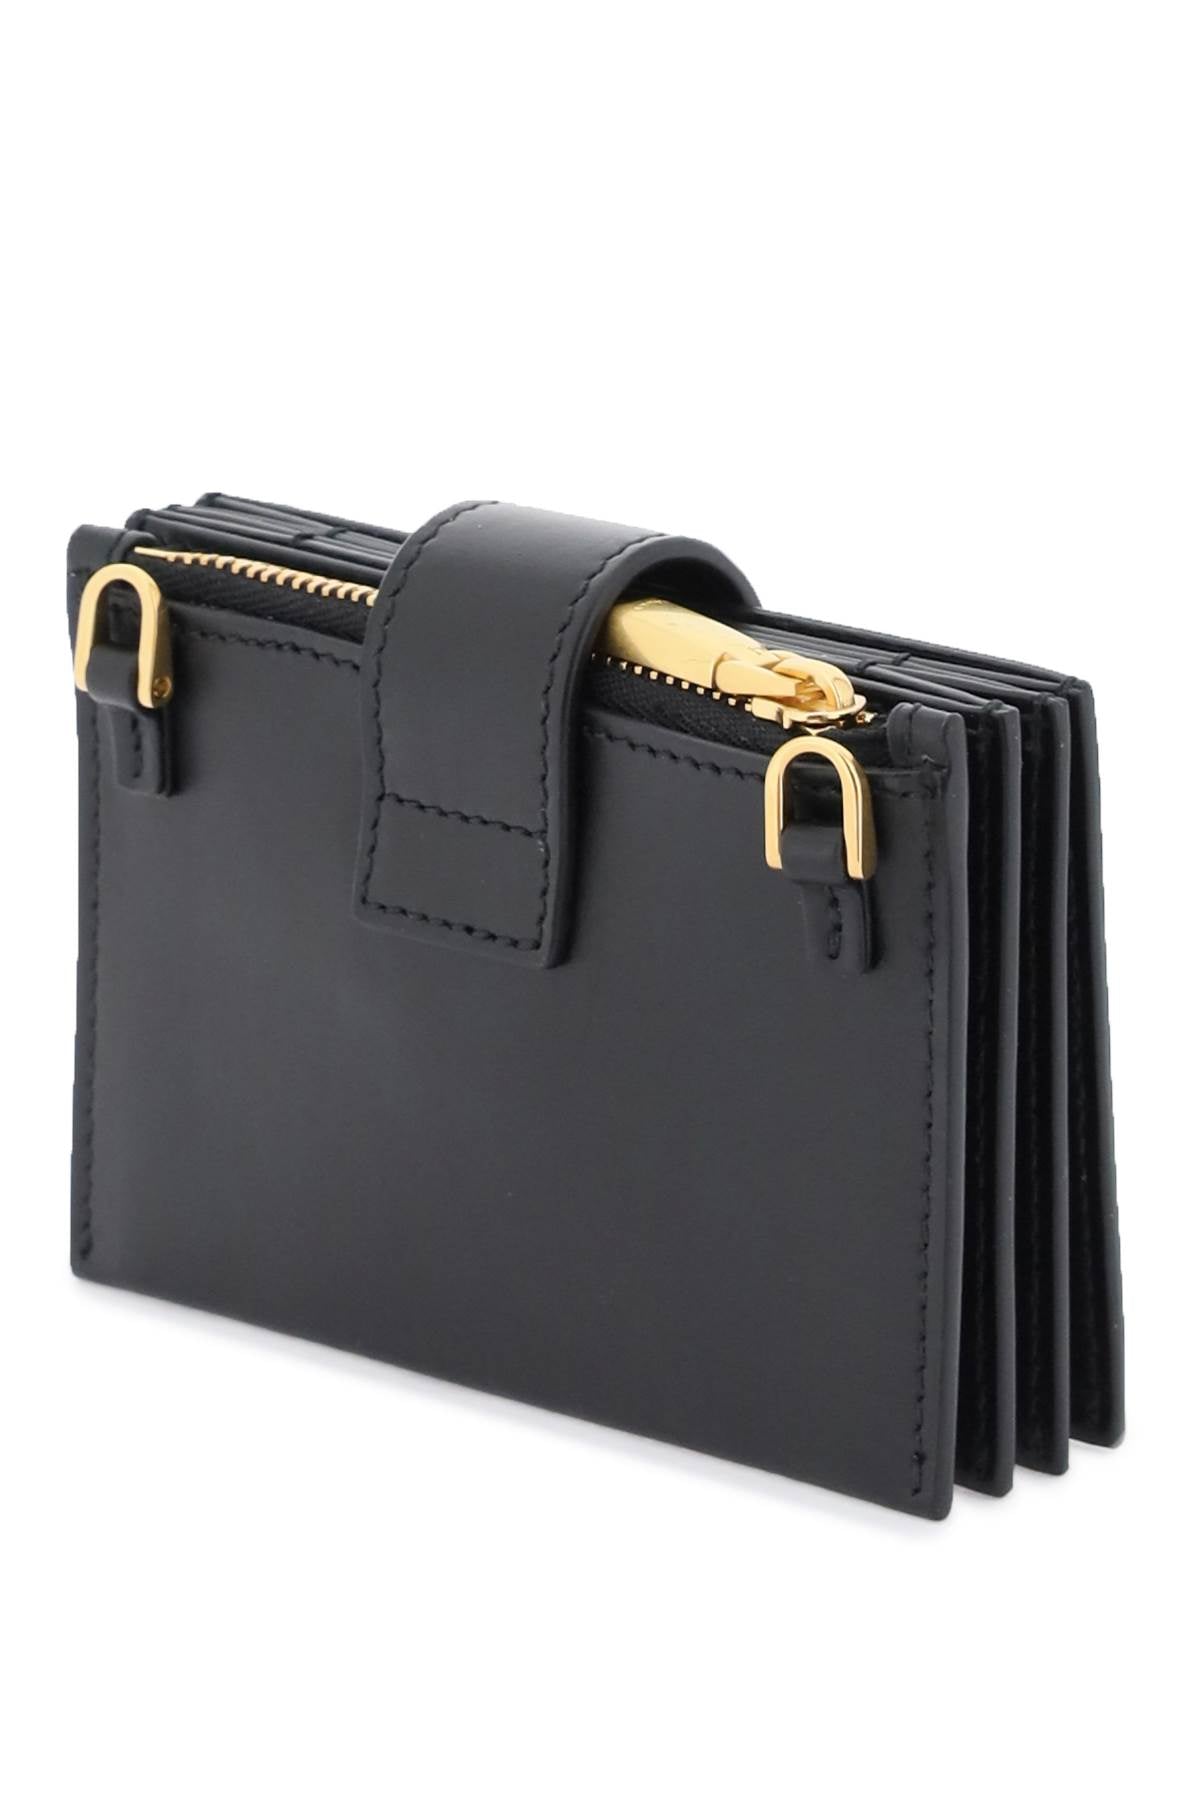 Bally leather emblem cardholder-women > accessories > wallets & small leather goods > card holder-Bally-os-Black-Urbanheer